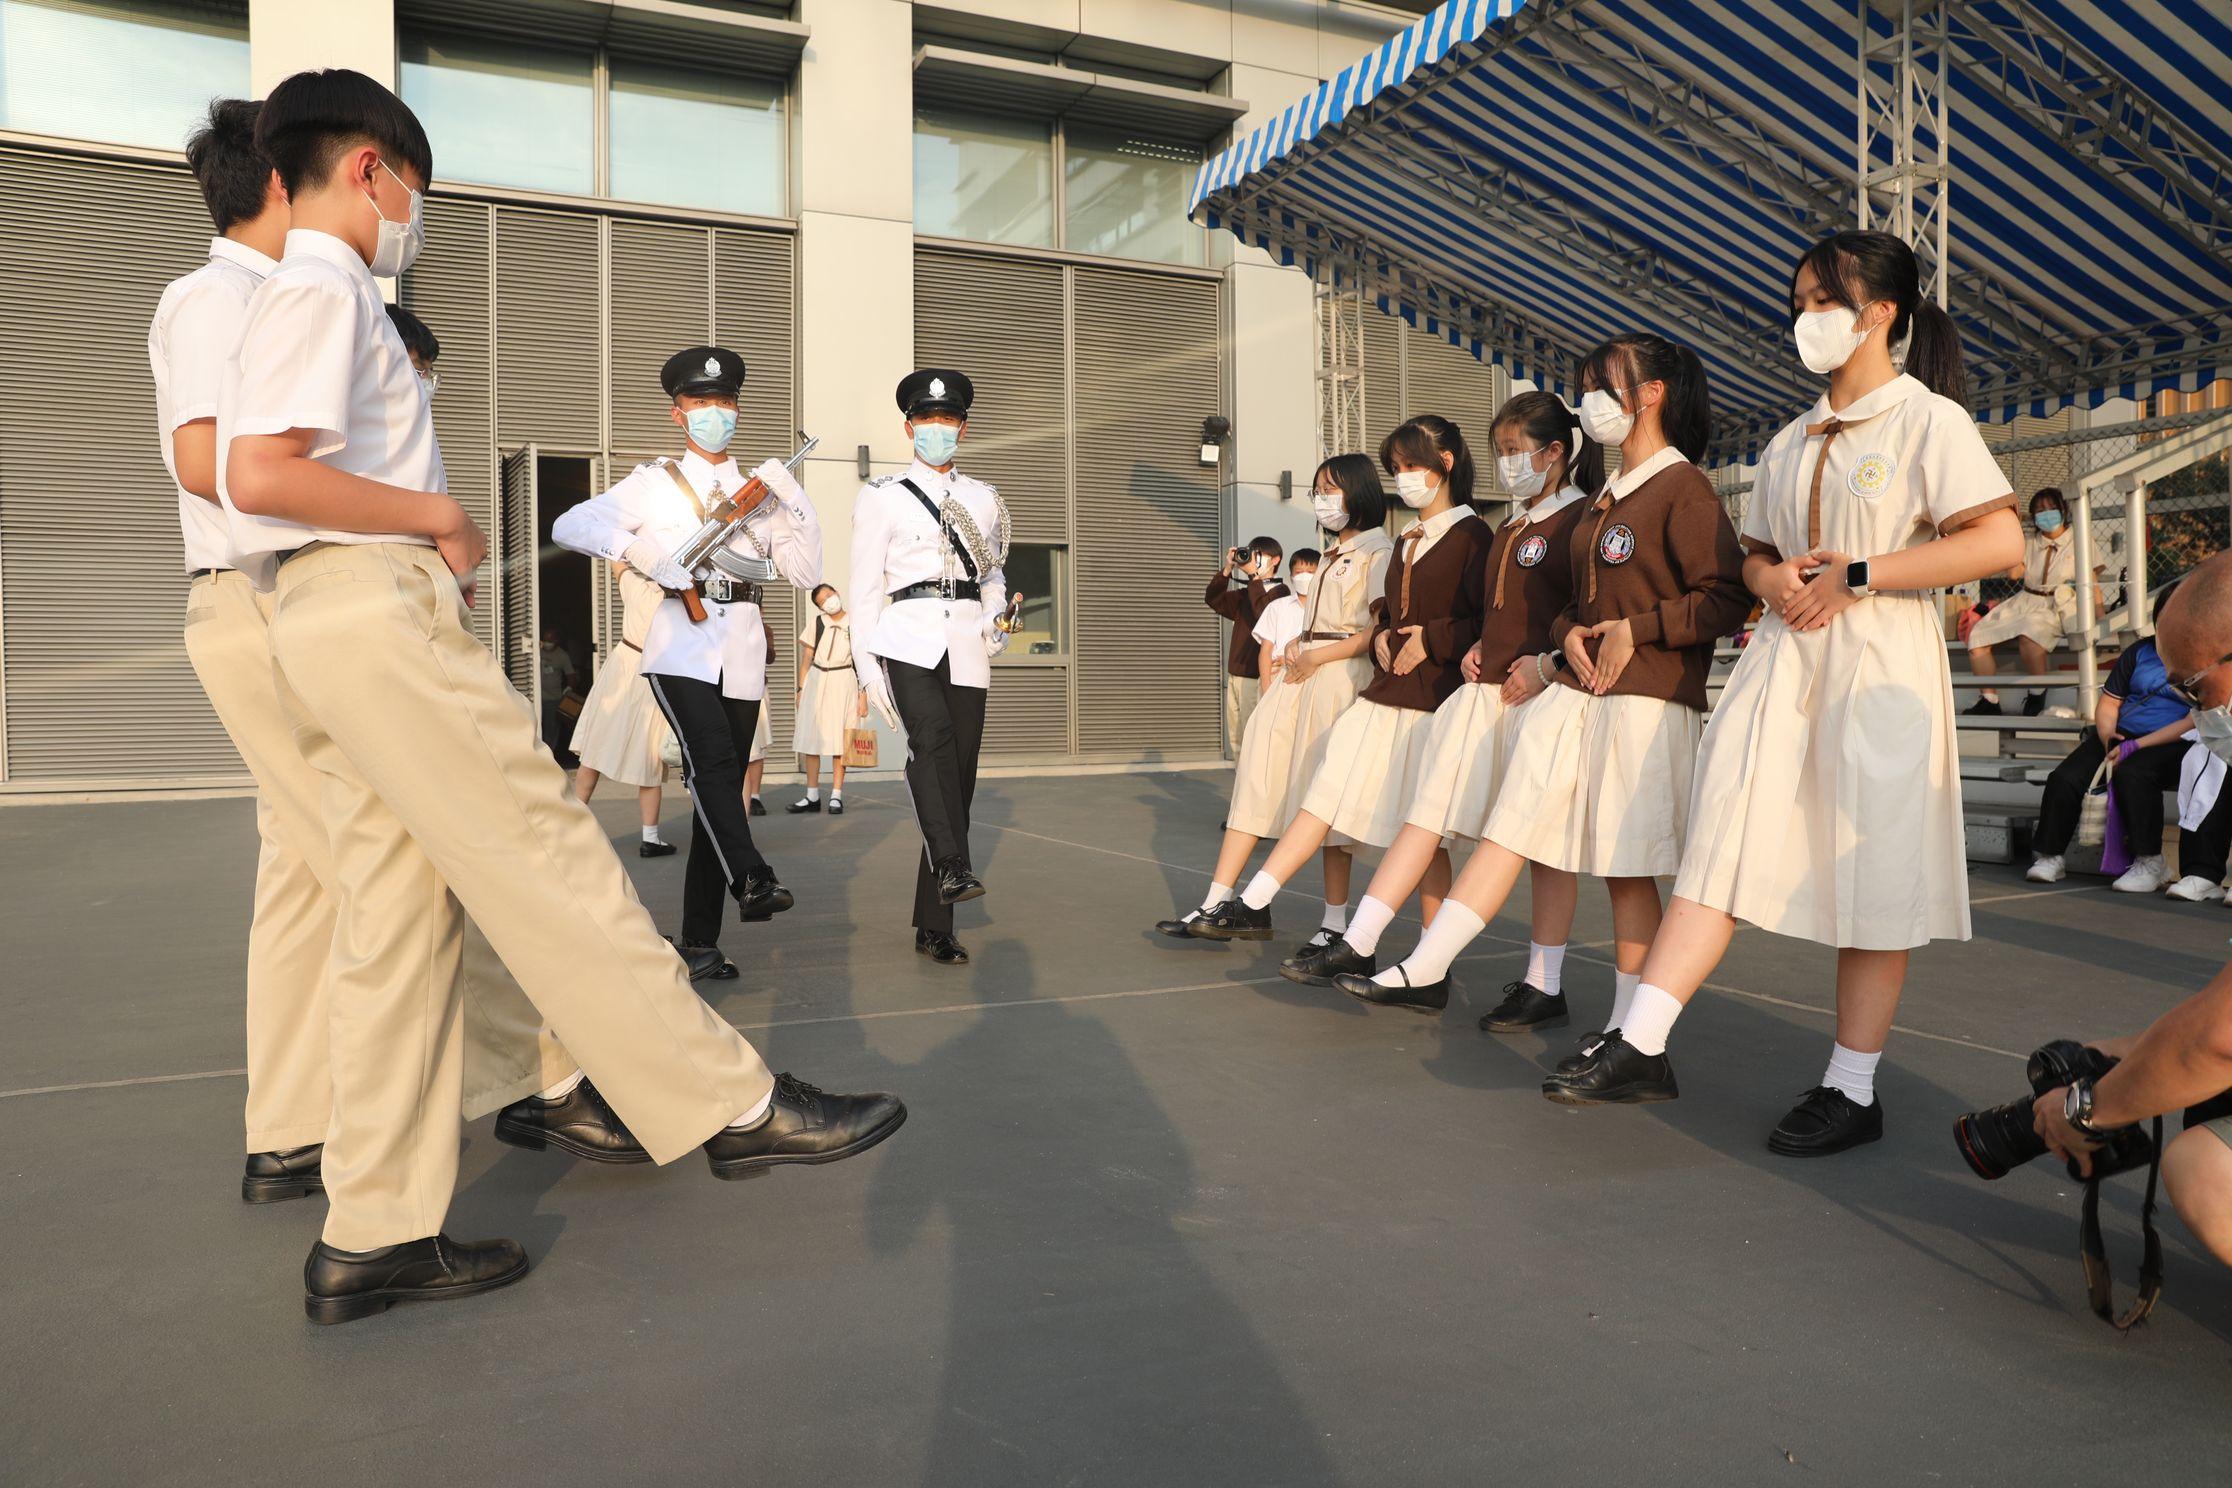 The Immigration Service Institute of Training and Development held an Open Day today (October 29). Photo shows the Departmental Contingent showing Chinese-style foot drill to secondary school students.